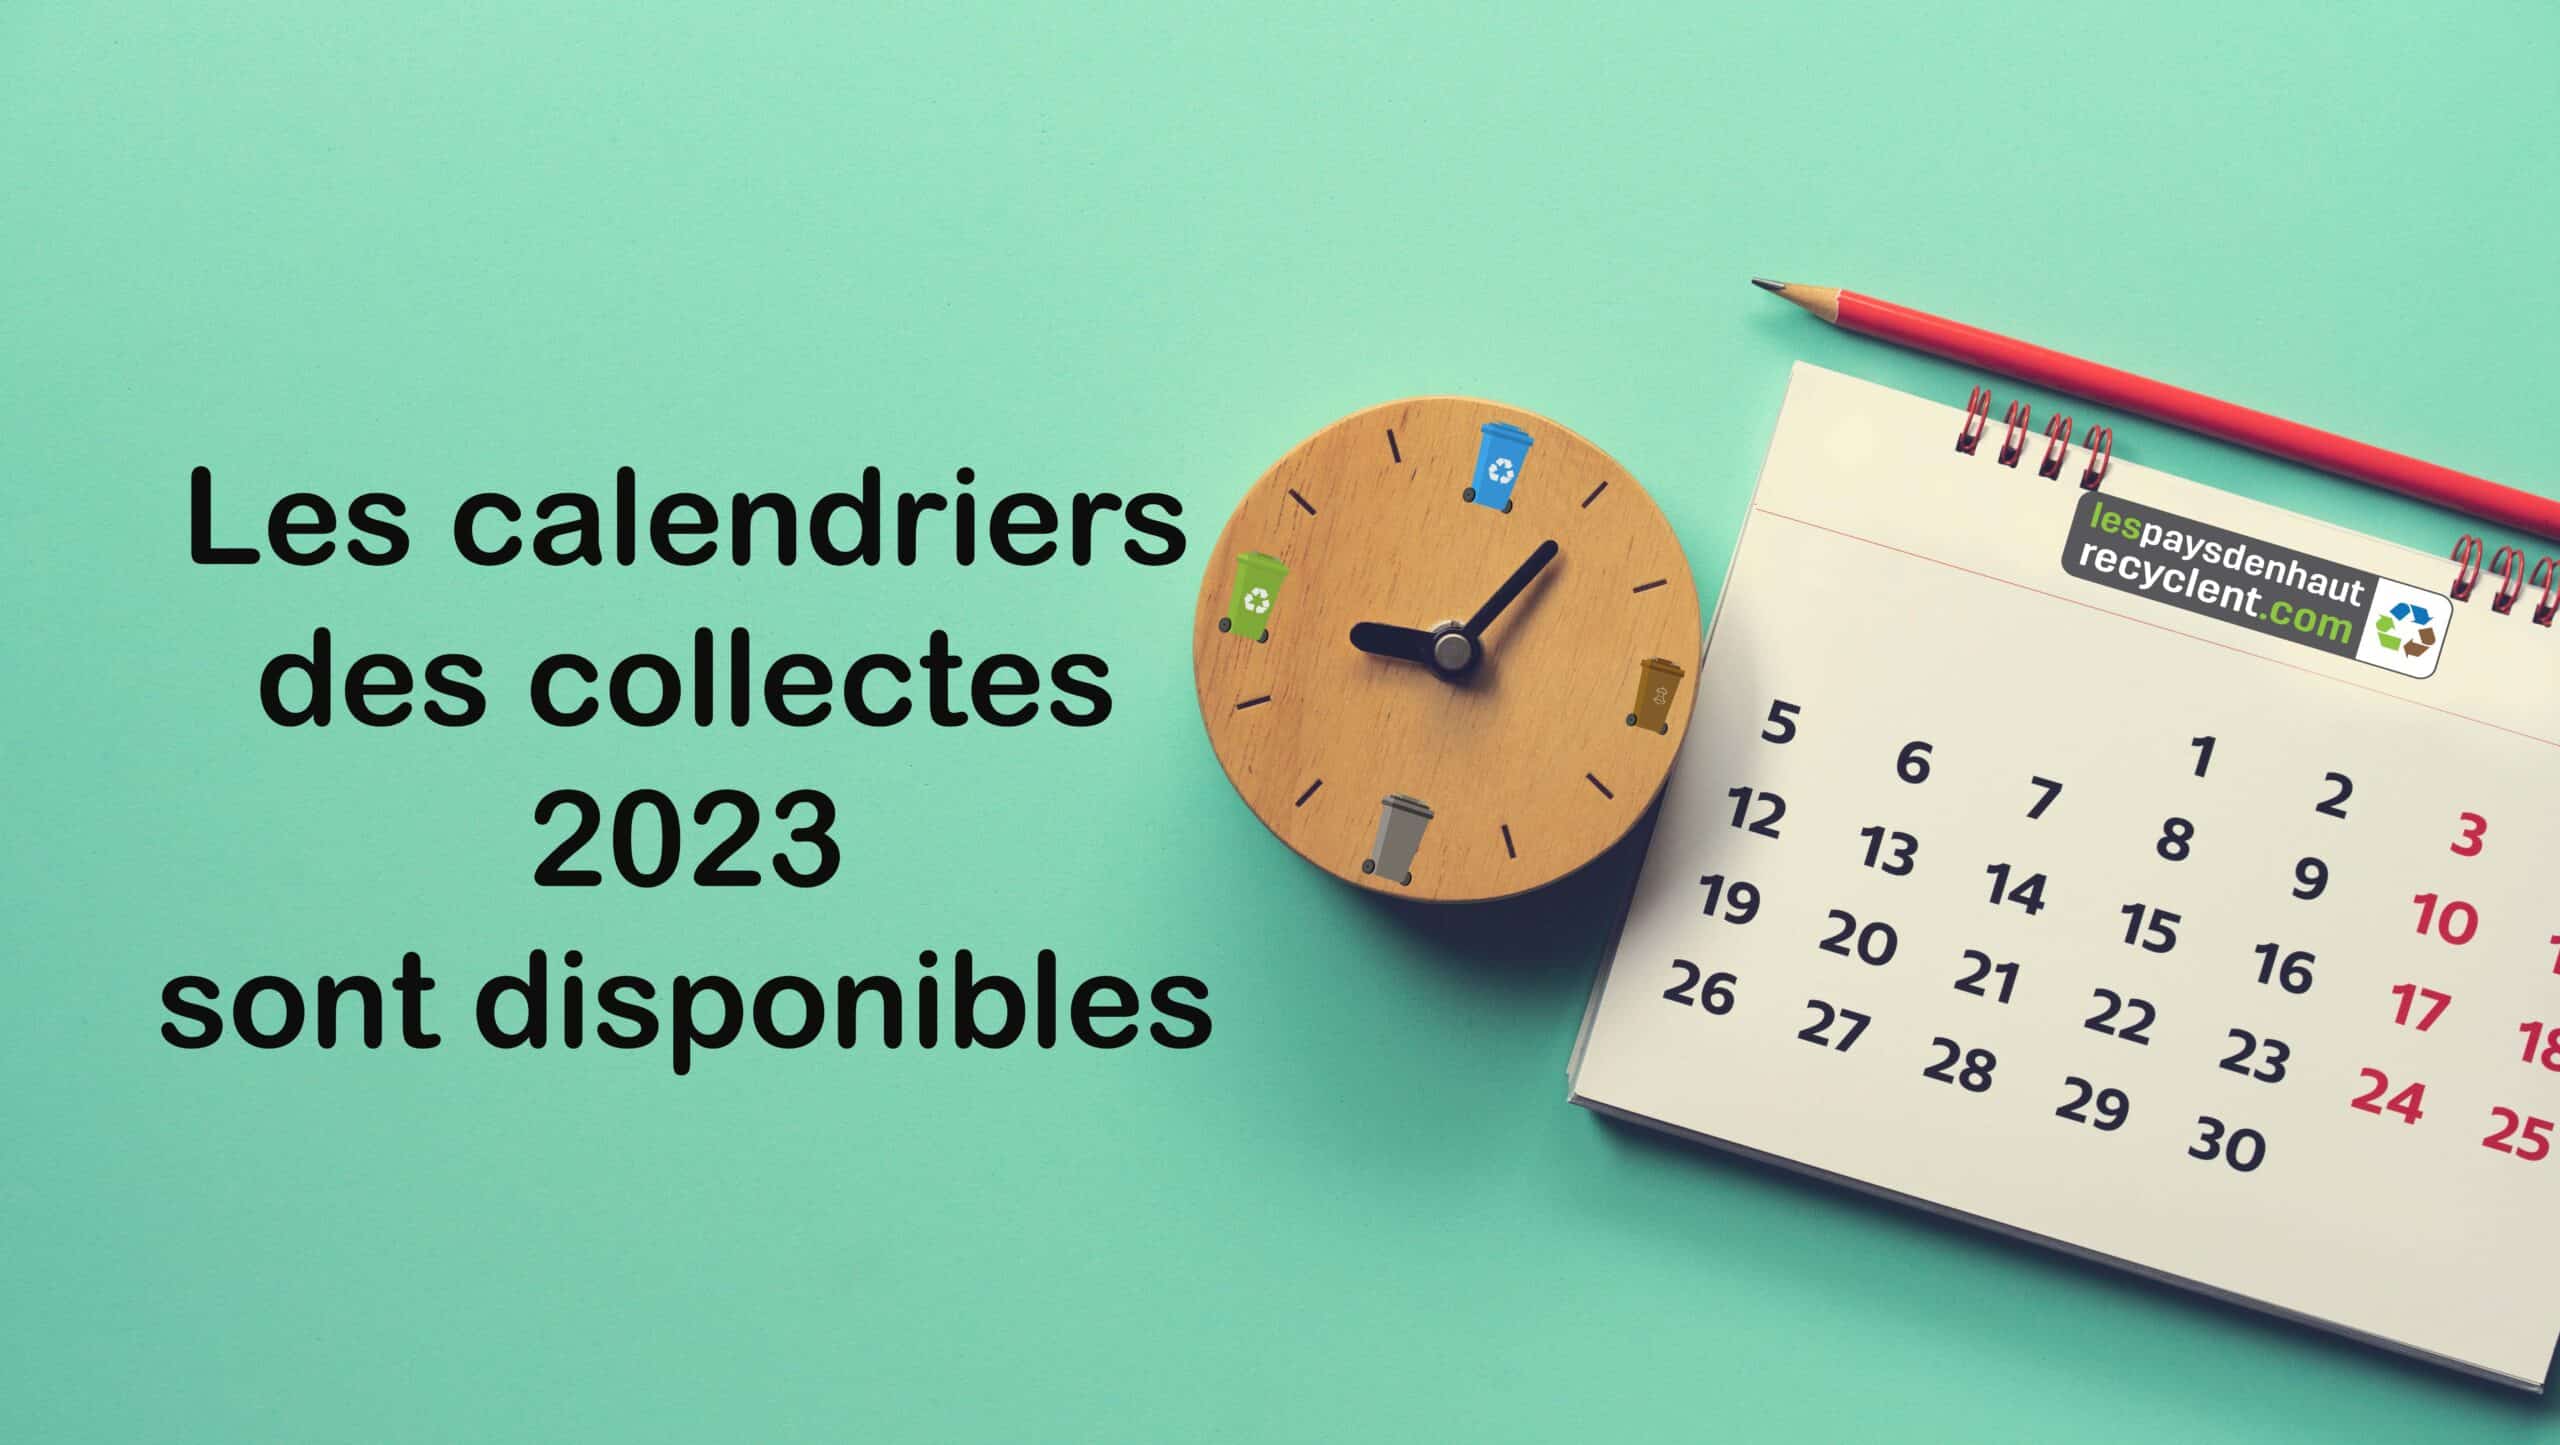 Calendriercollectes2023 Scaled 